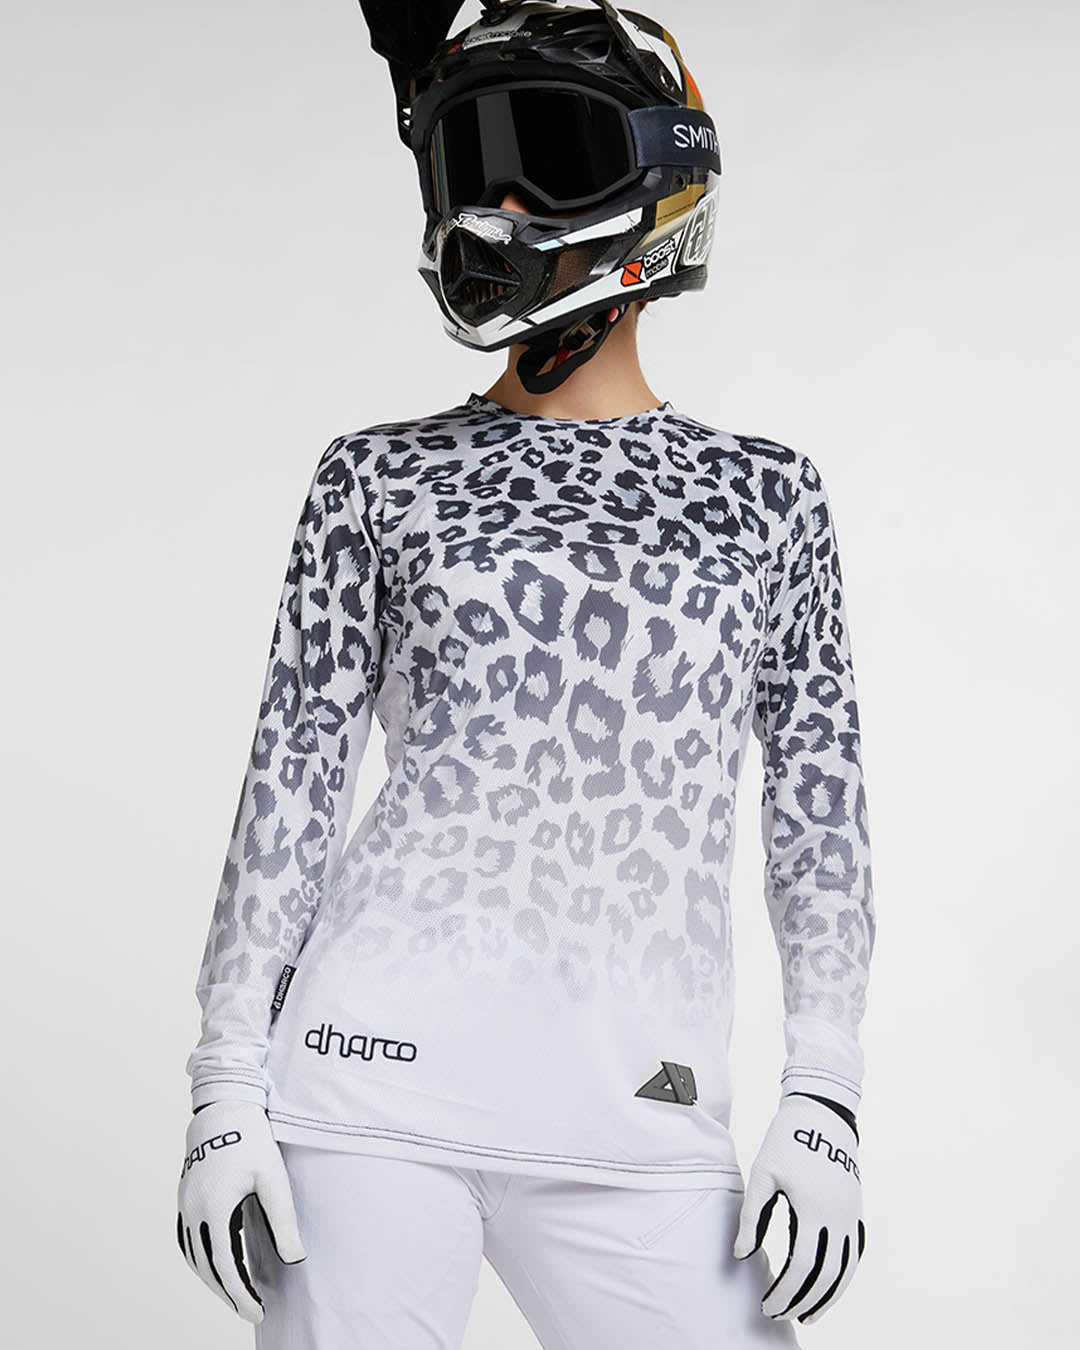 Jersey Race Mujer Dharco Amaury Pierron Signature Edition